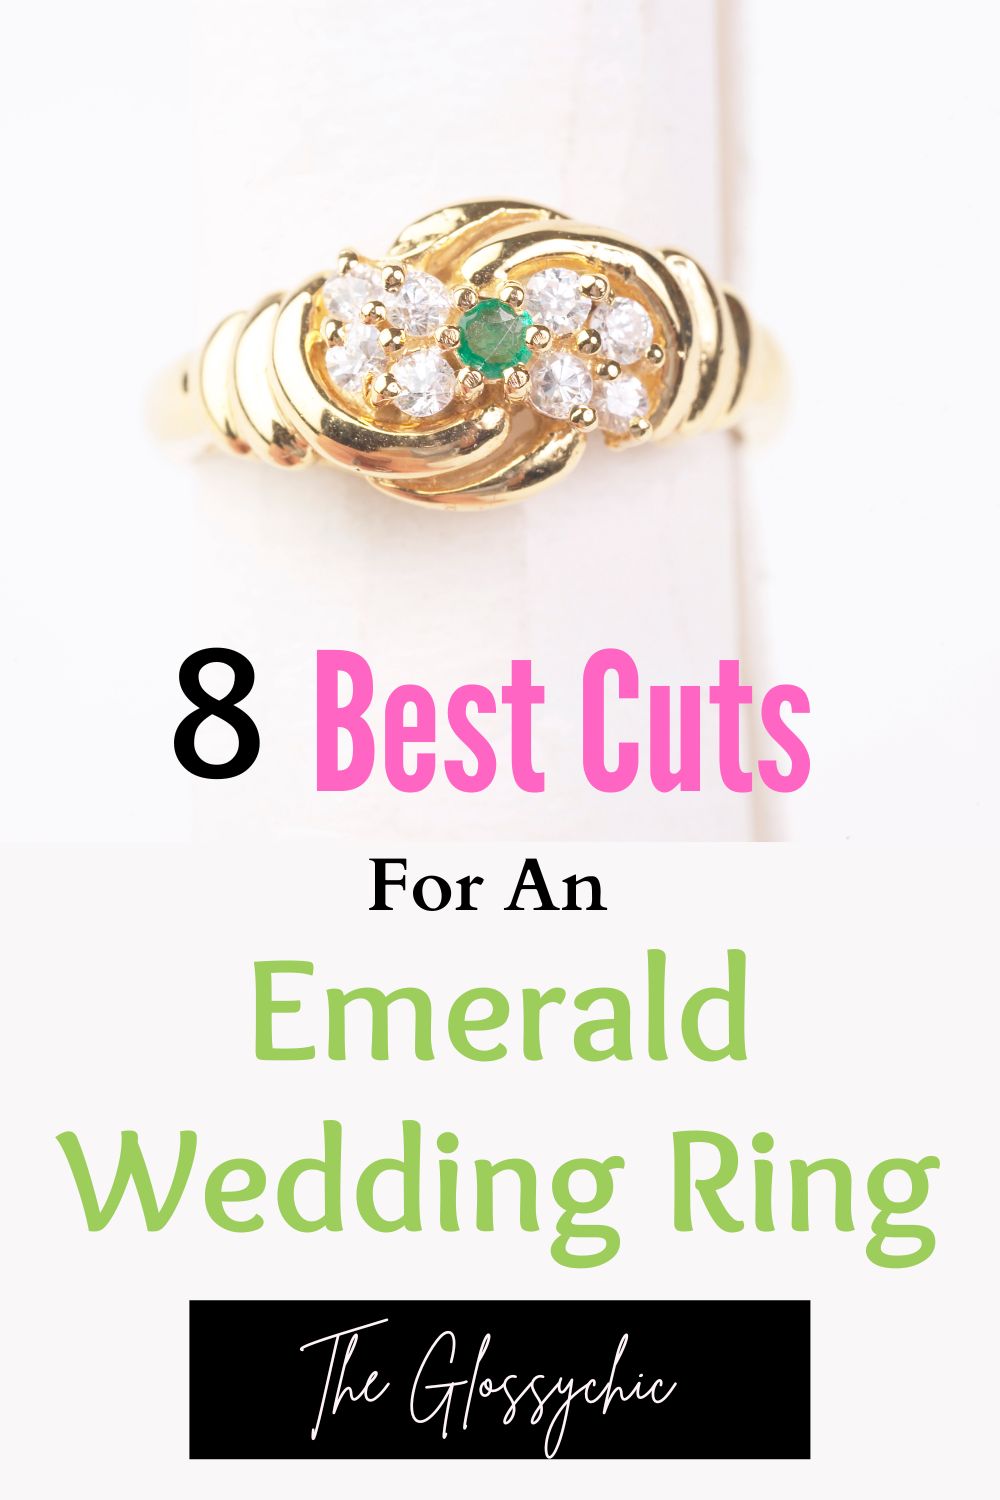 Best Cuts And Design Ideas For An Emerald Wedding Ring